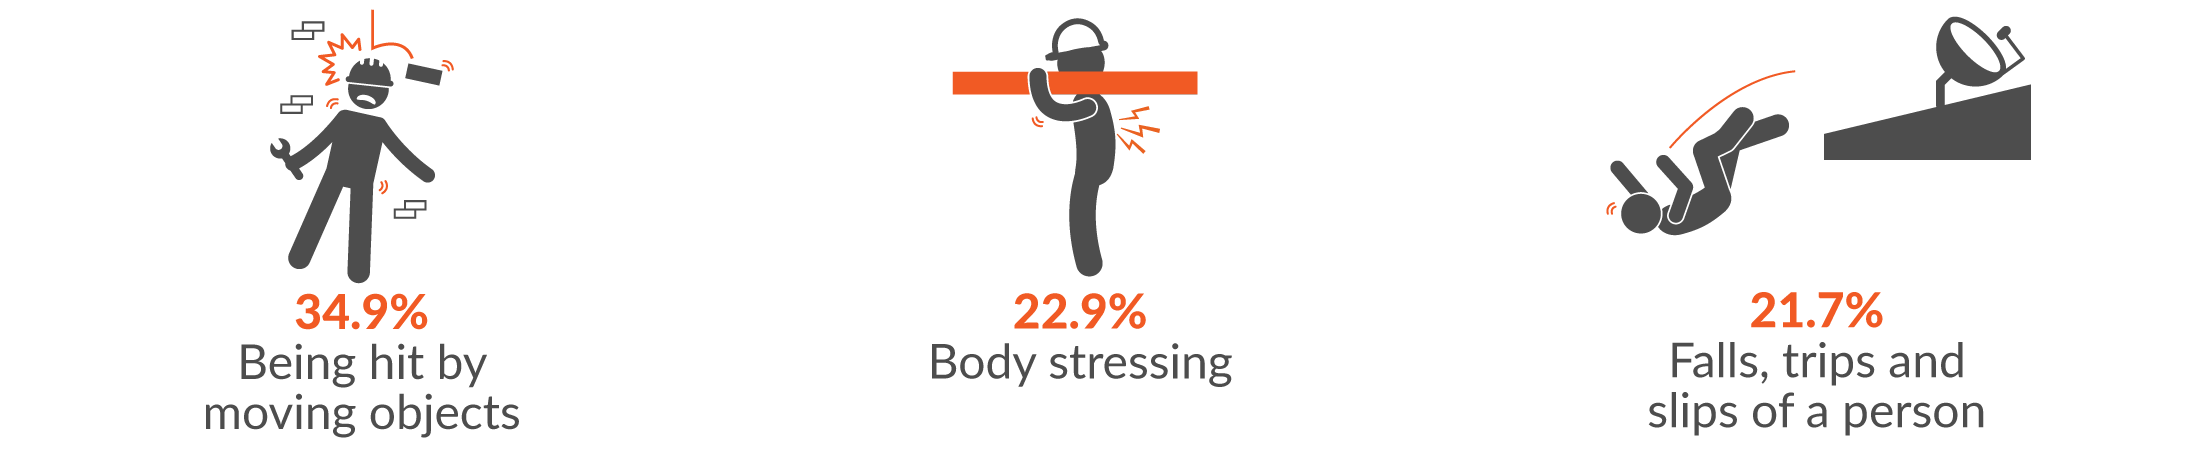 This infographic shows the main three mechanisms of injury for construction claims were 34.9% being hit by moving object; 22.9% body stressing; and 21.7% falls, trips and slips of a person.